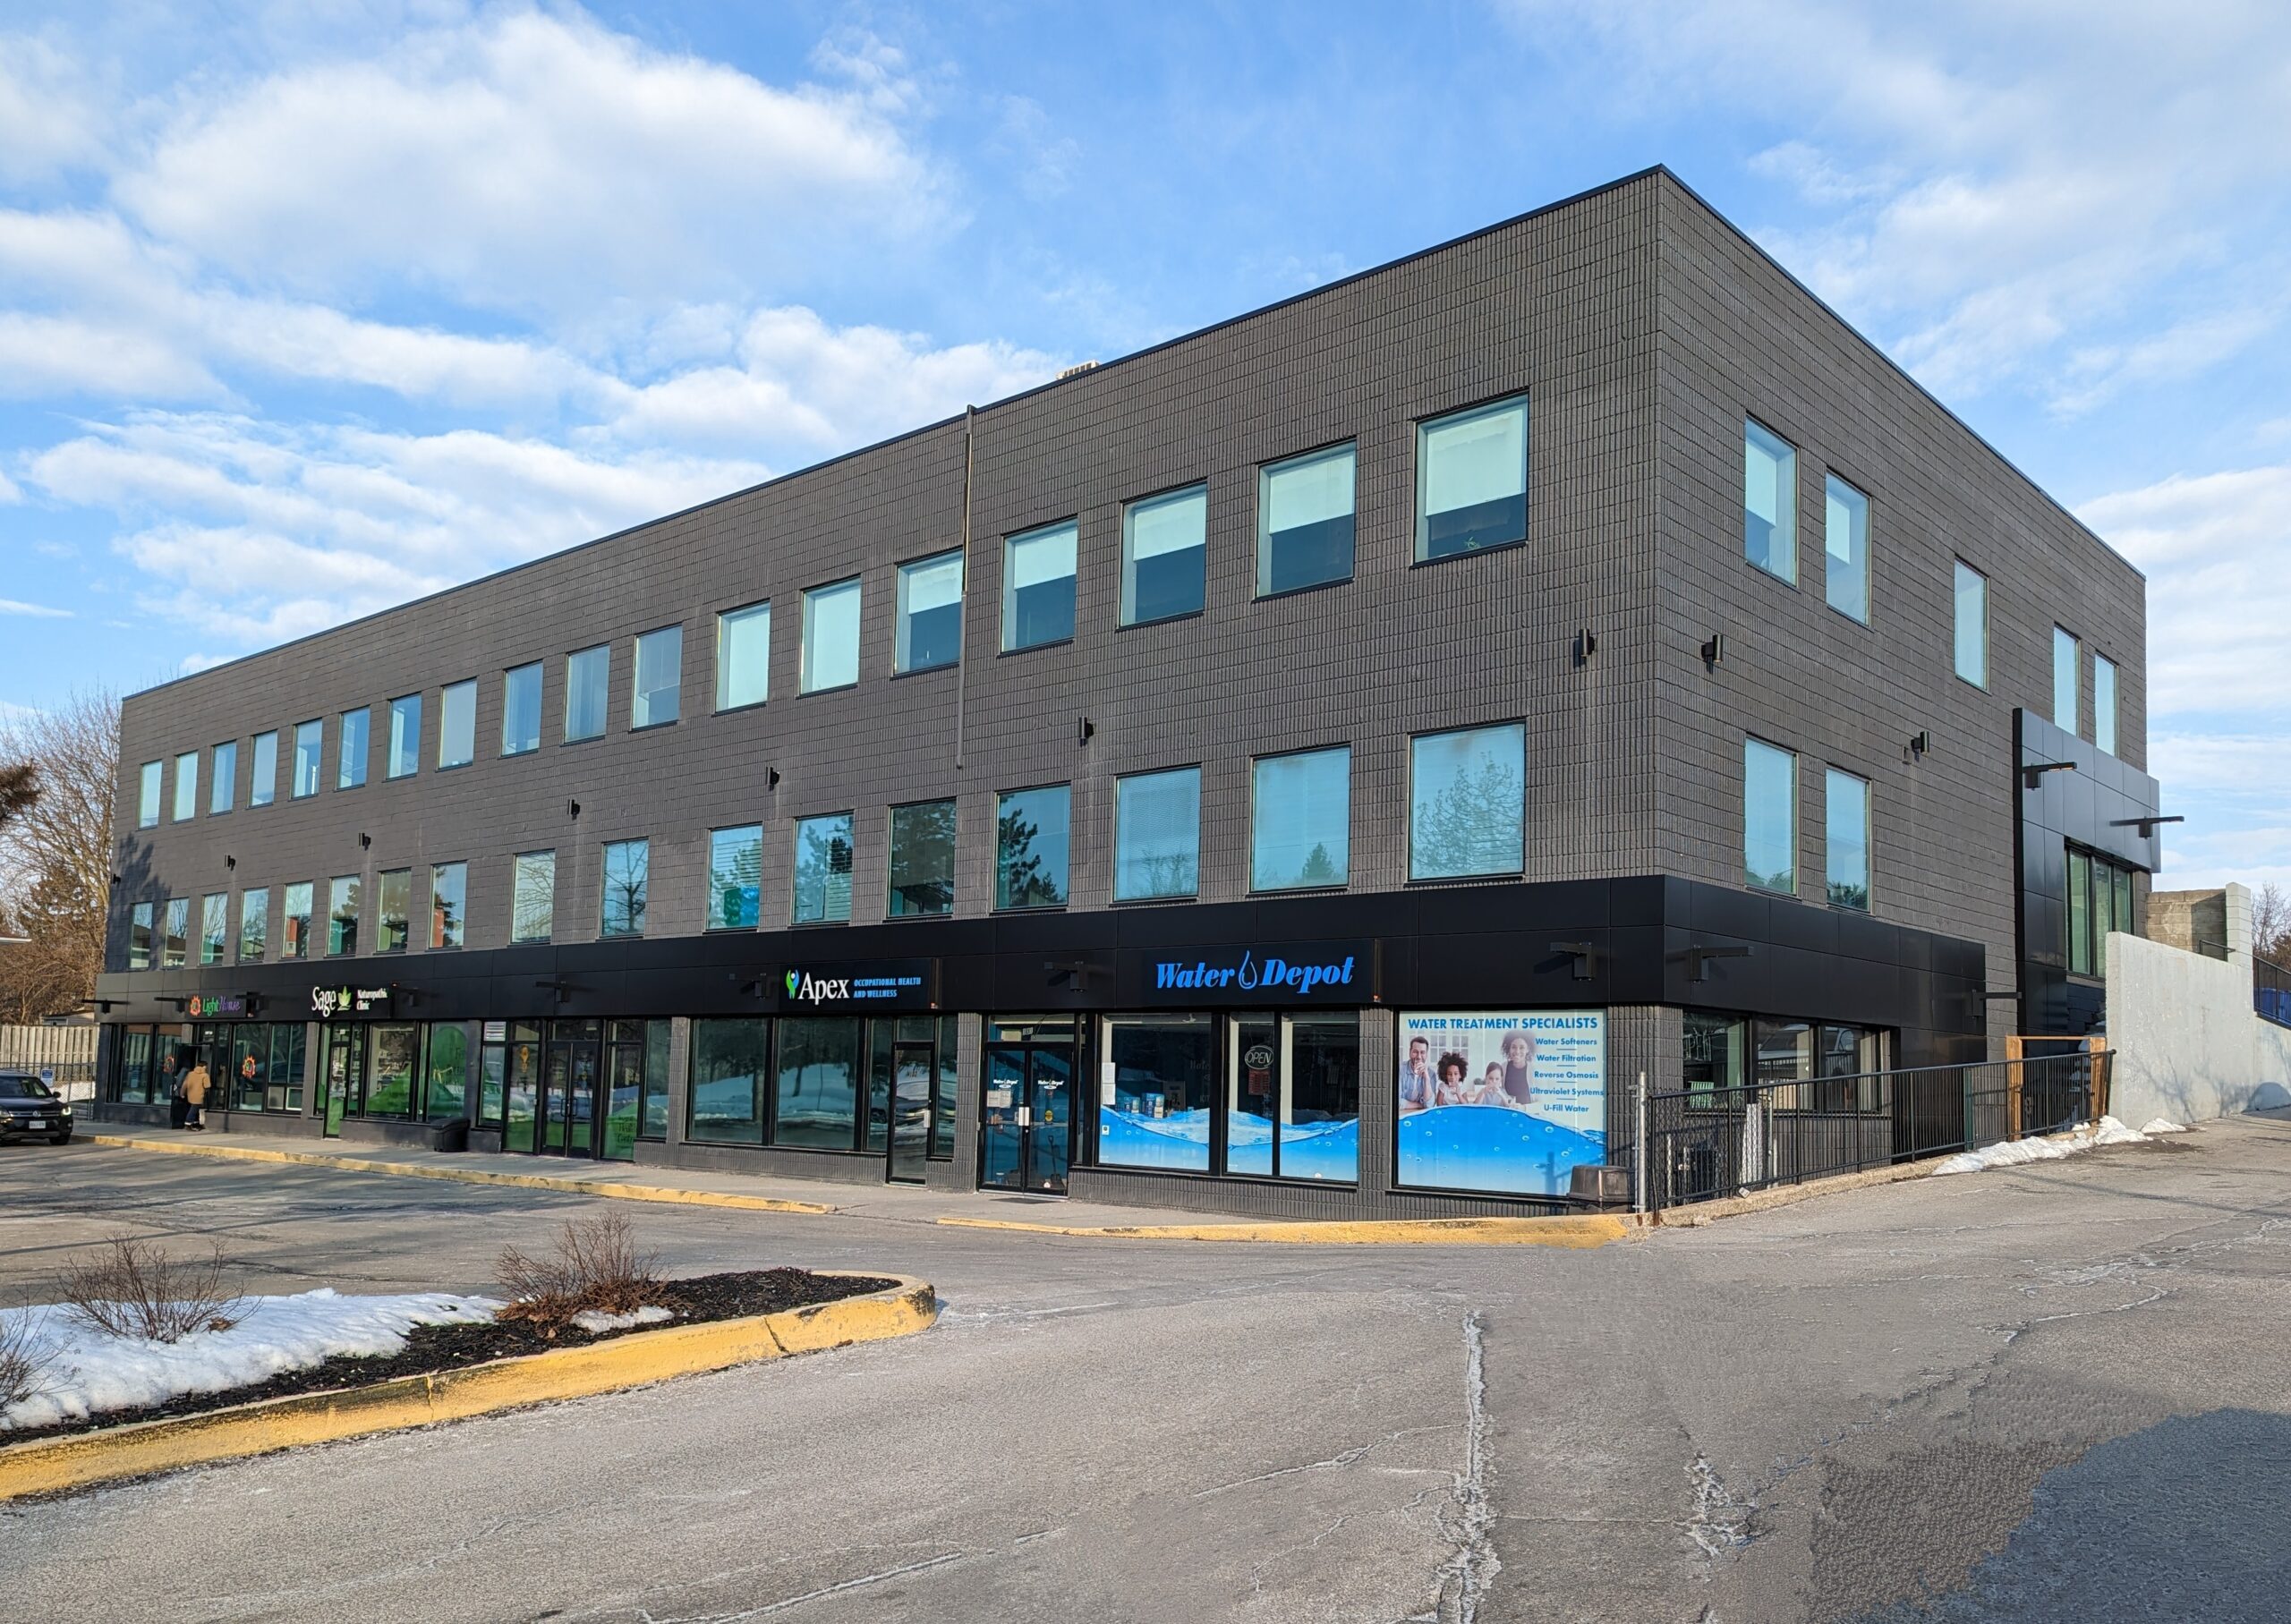 1601 River Rd E, Kitchener | Office Spaces for Lease